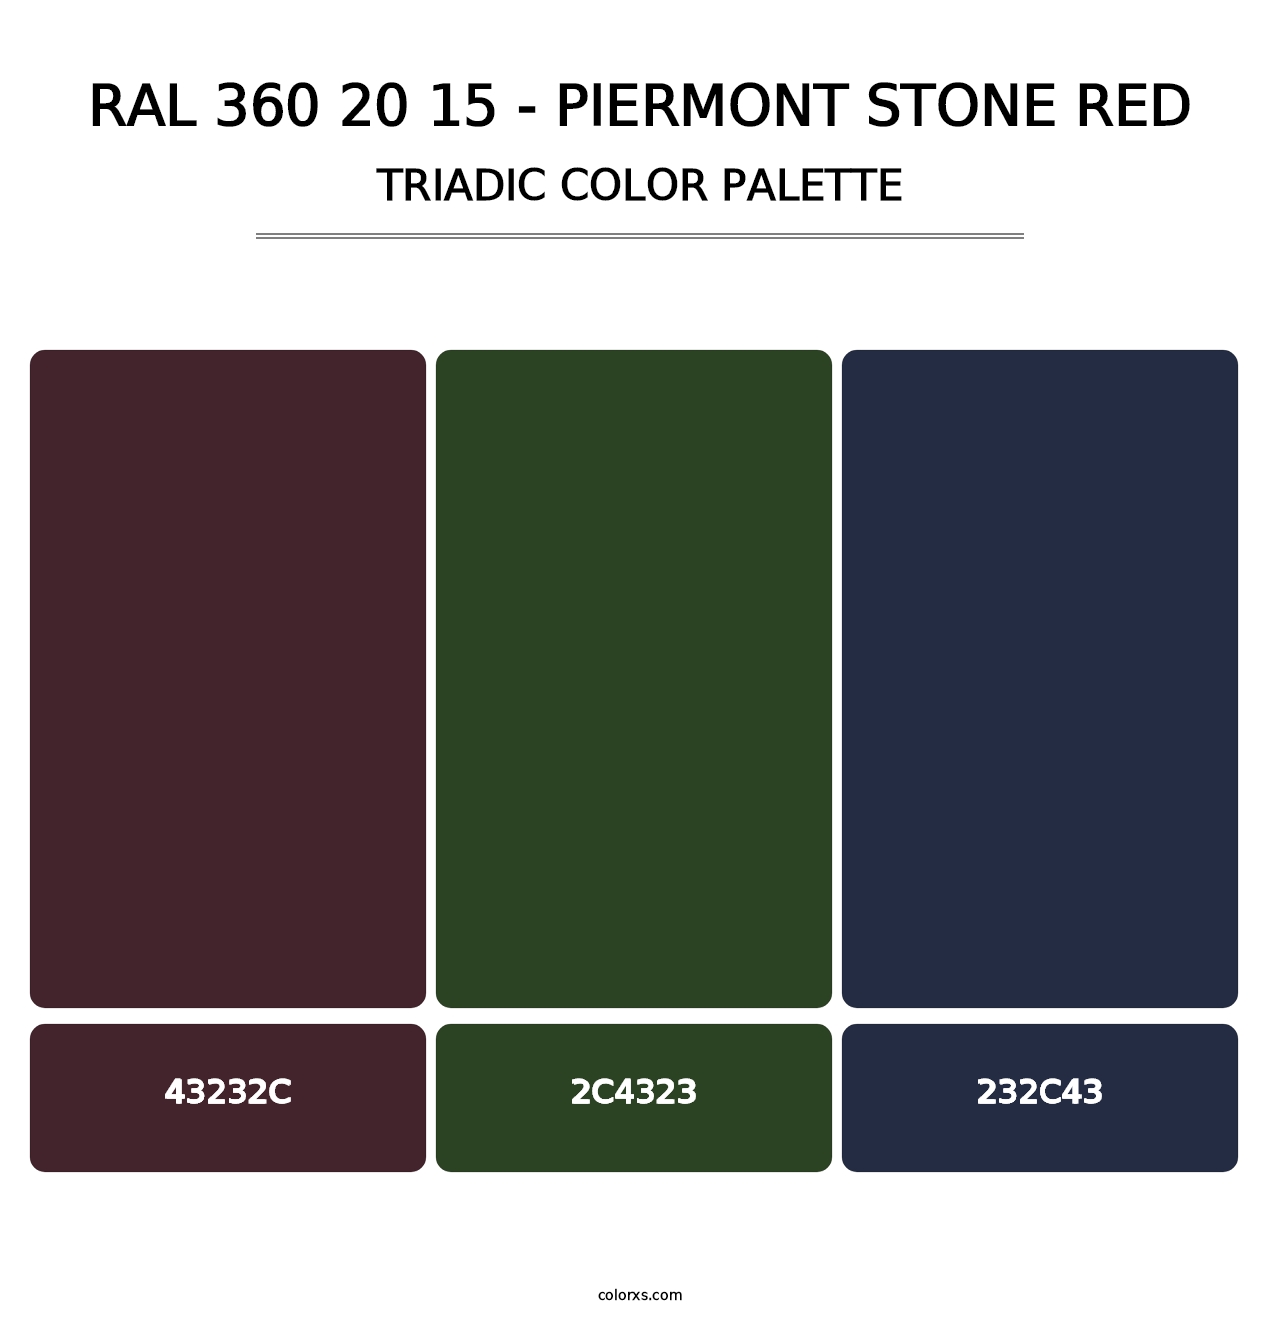 RAL 360 20 15 - Piermont Stone Red - Triadic Color Palette